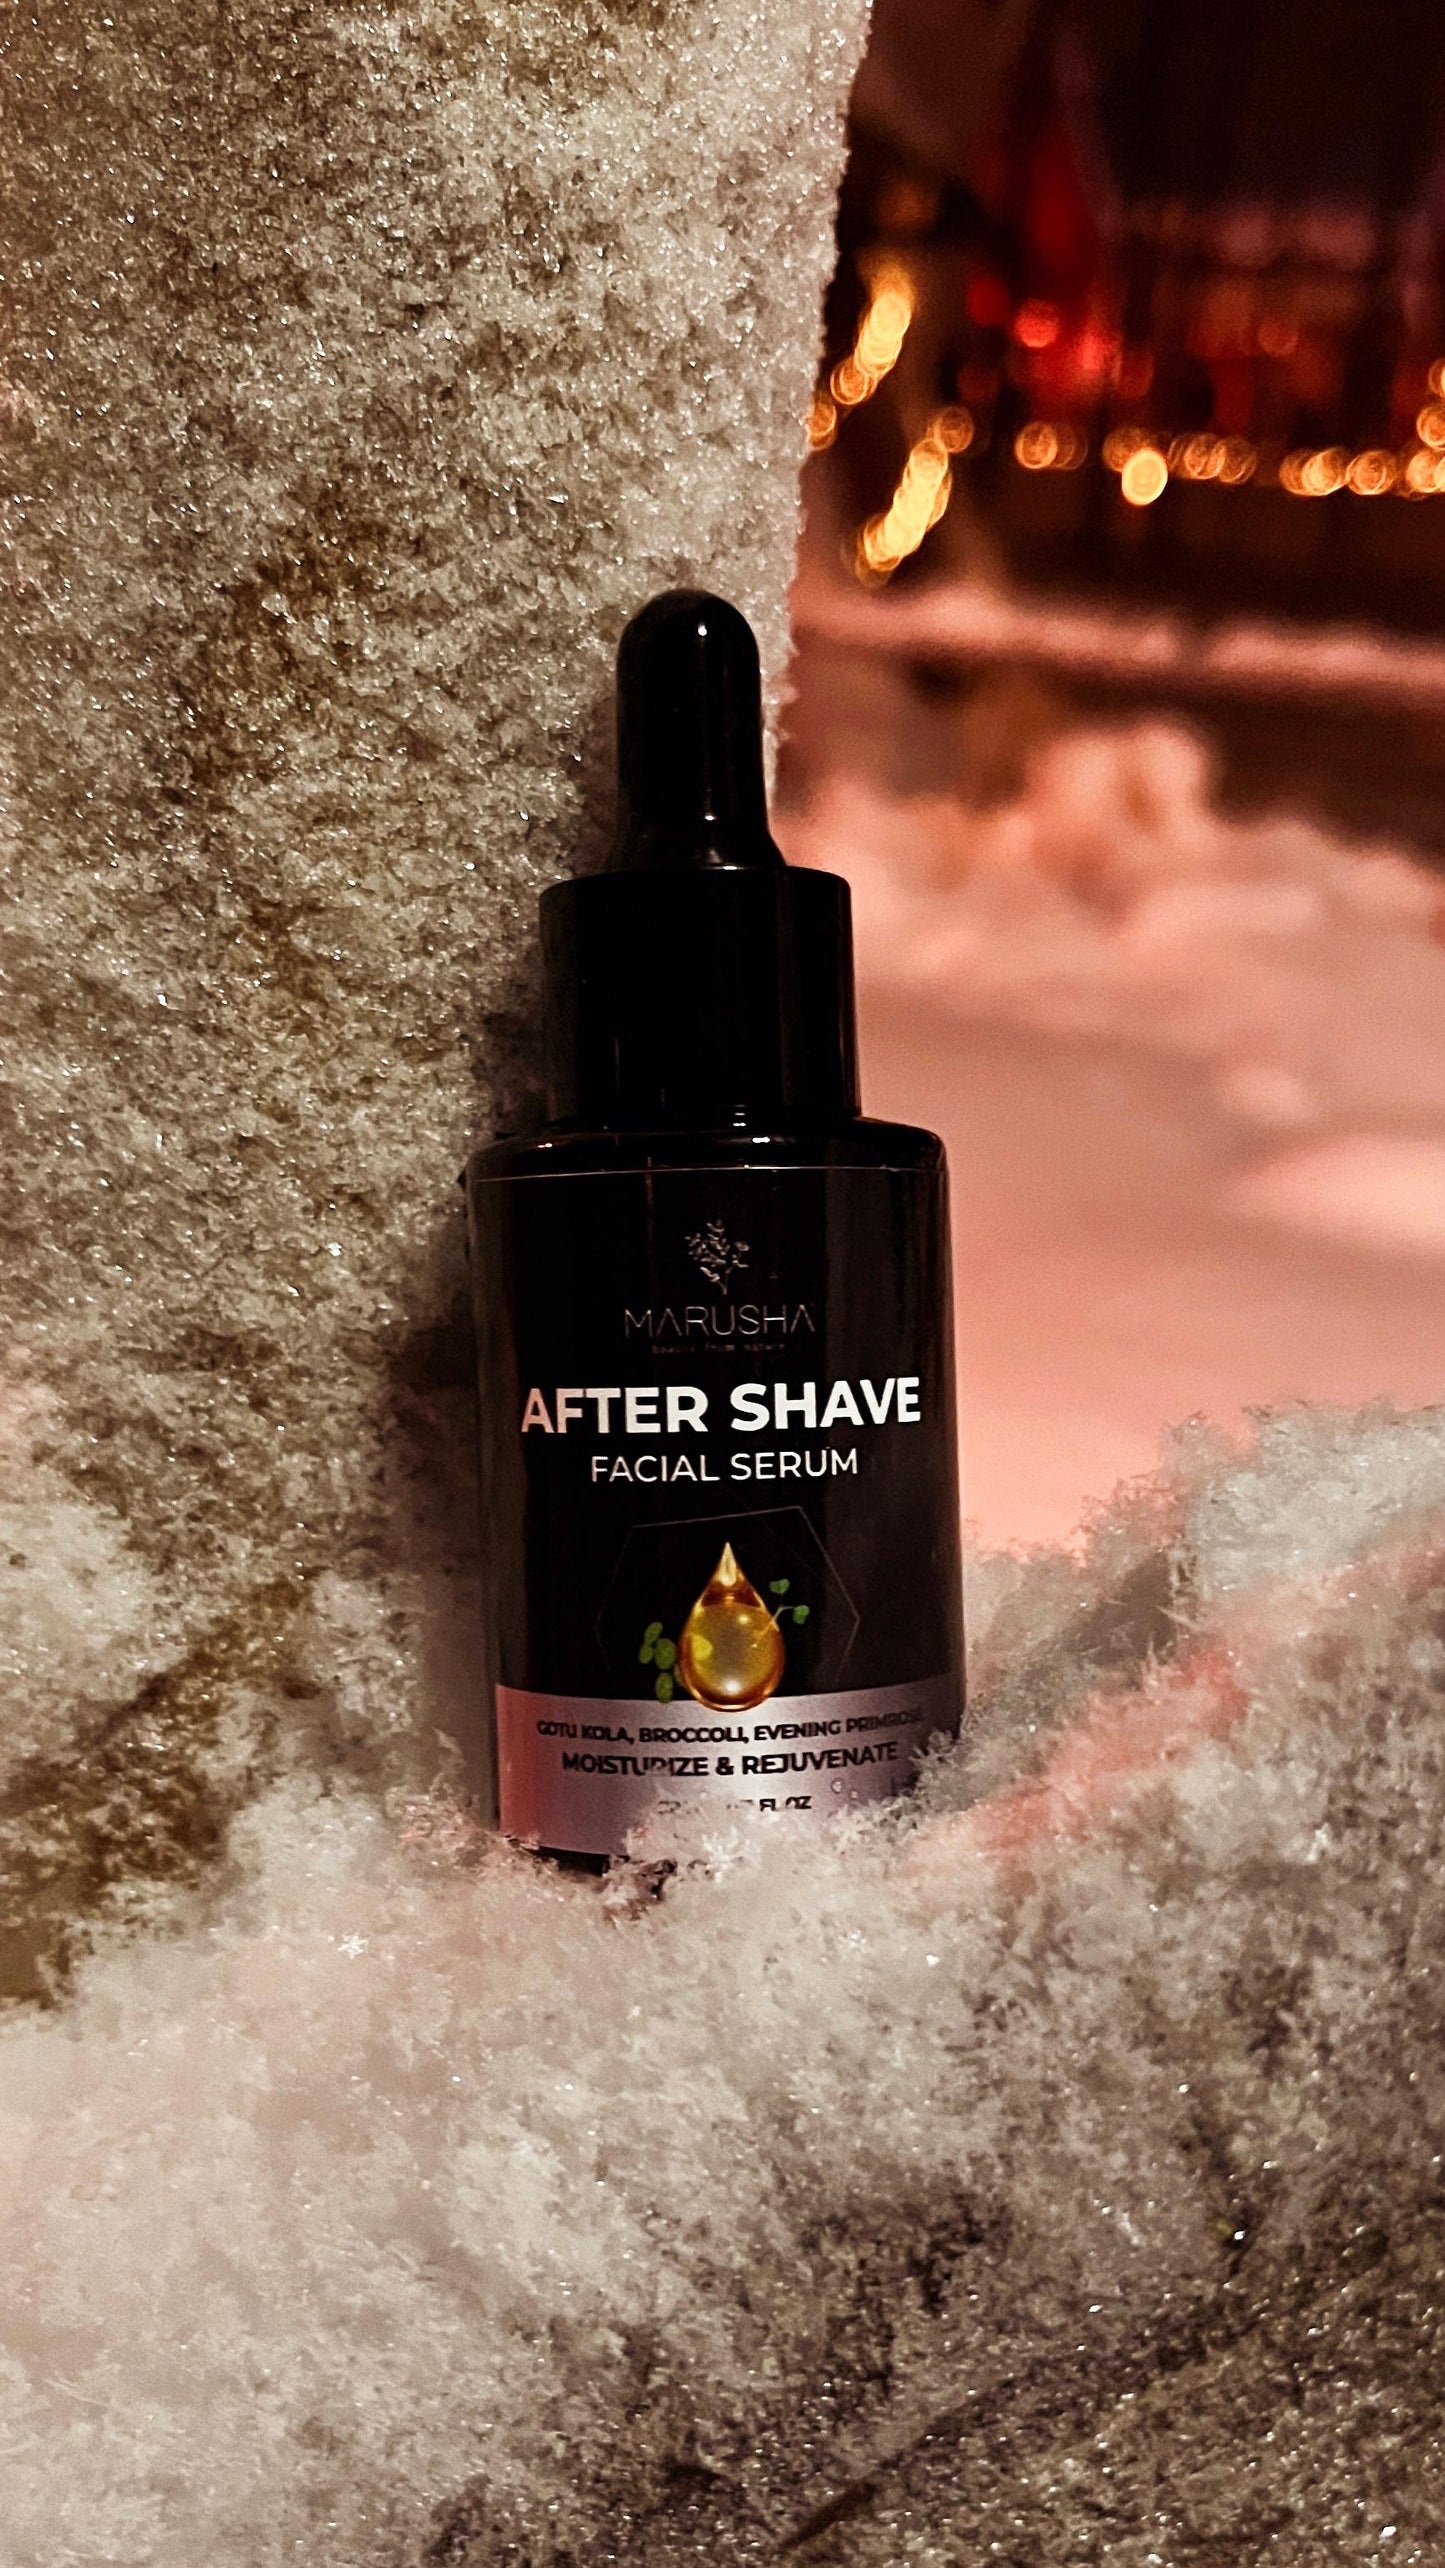 Beard and after shave serum for man in winter snow